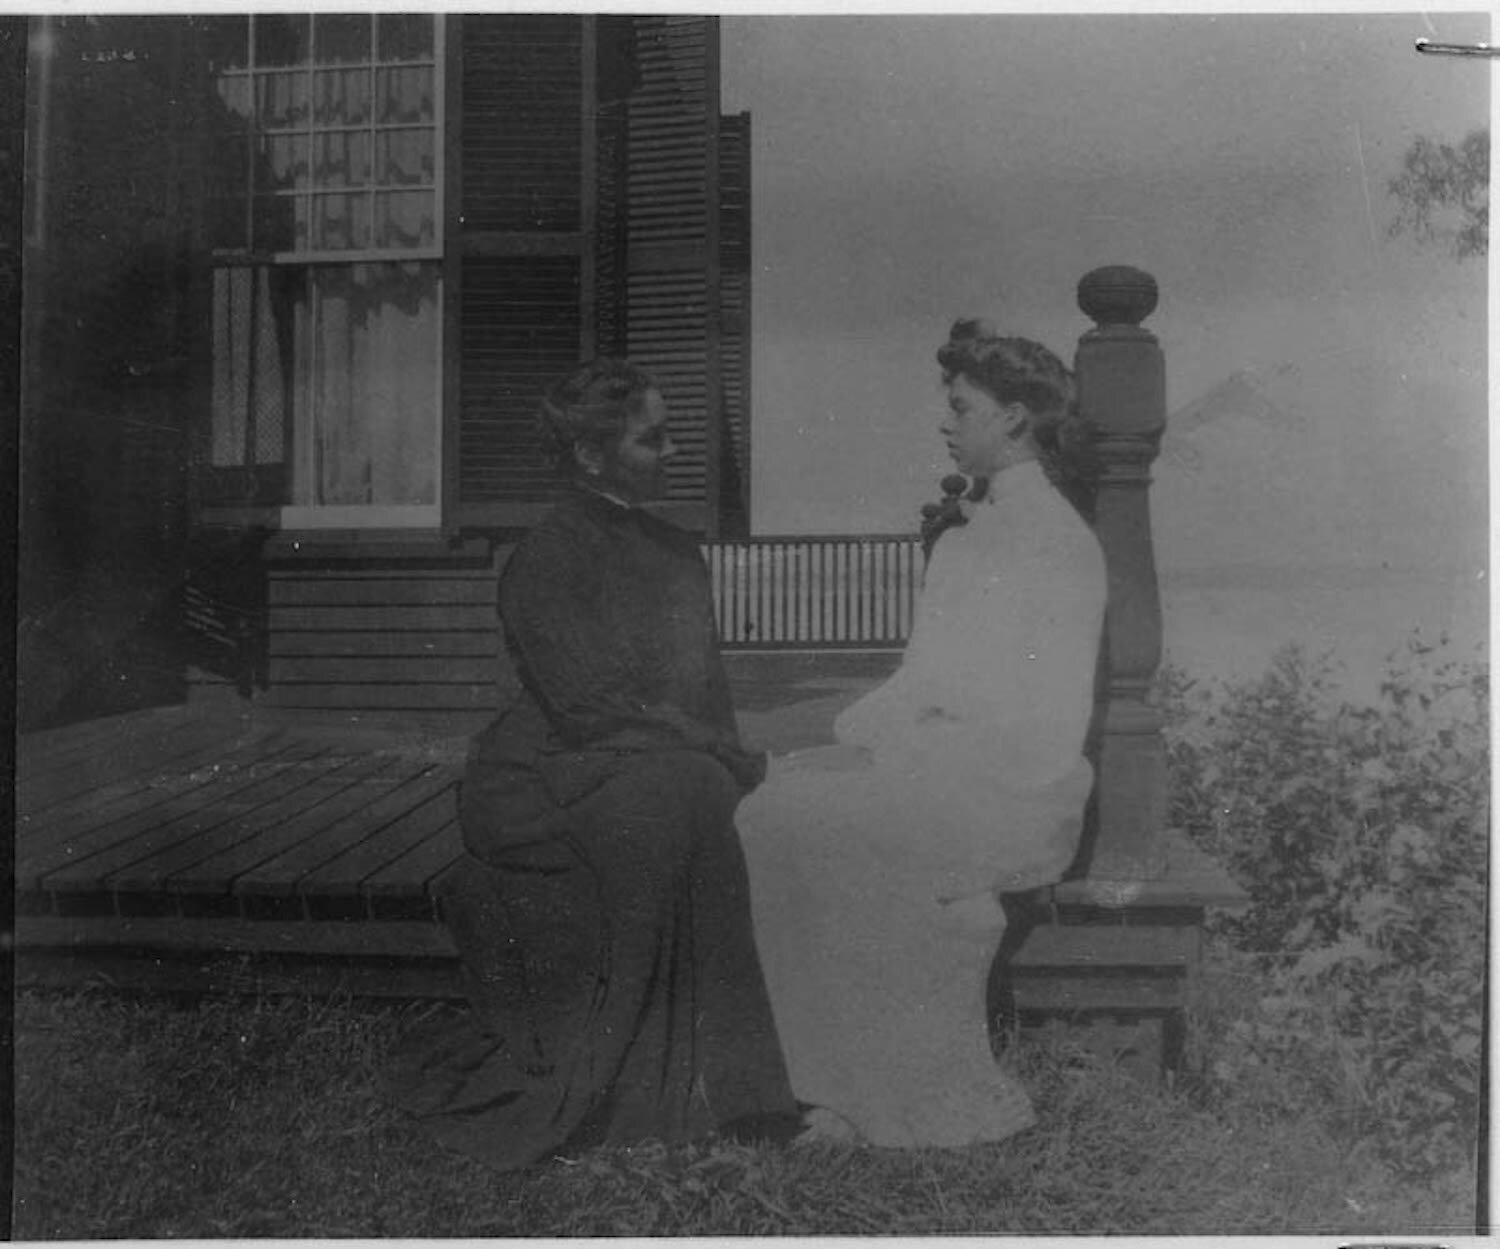 Eleanor Roosevelt and Sara Delano Roosevelt on the porch of the James and Sara Roosevelt summer home on Campobello Island, New Brunswick, Canada. (1904)